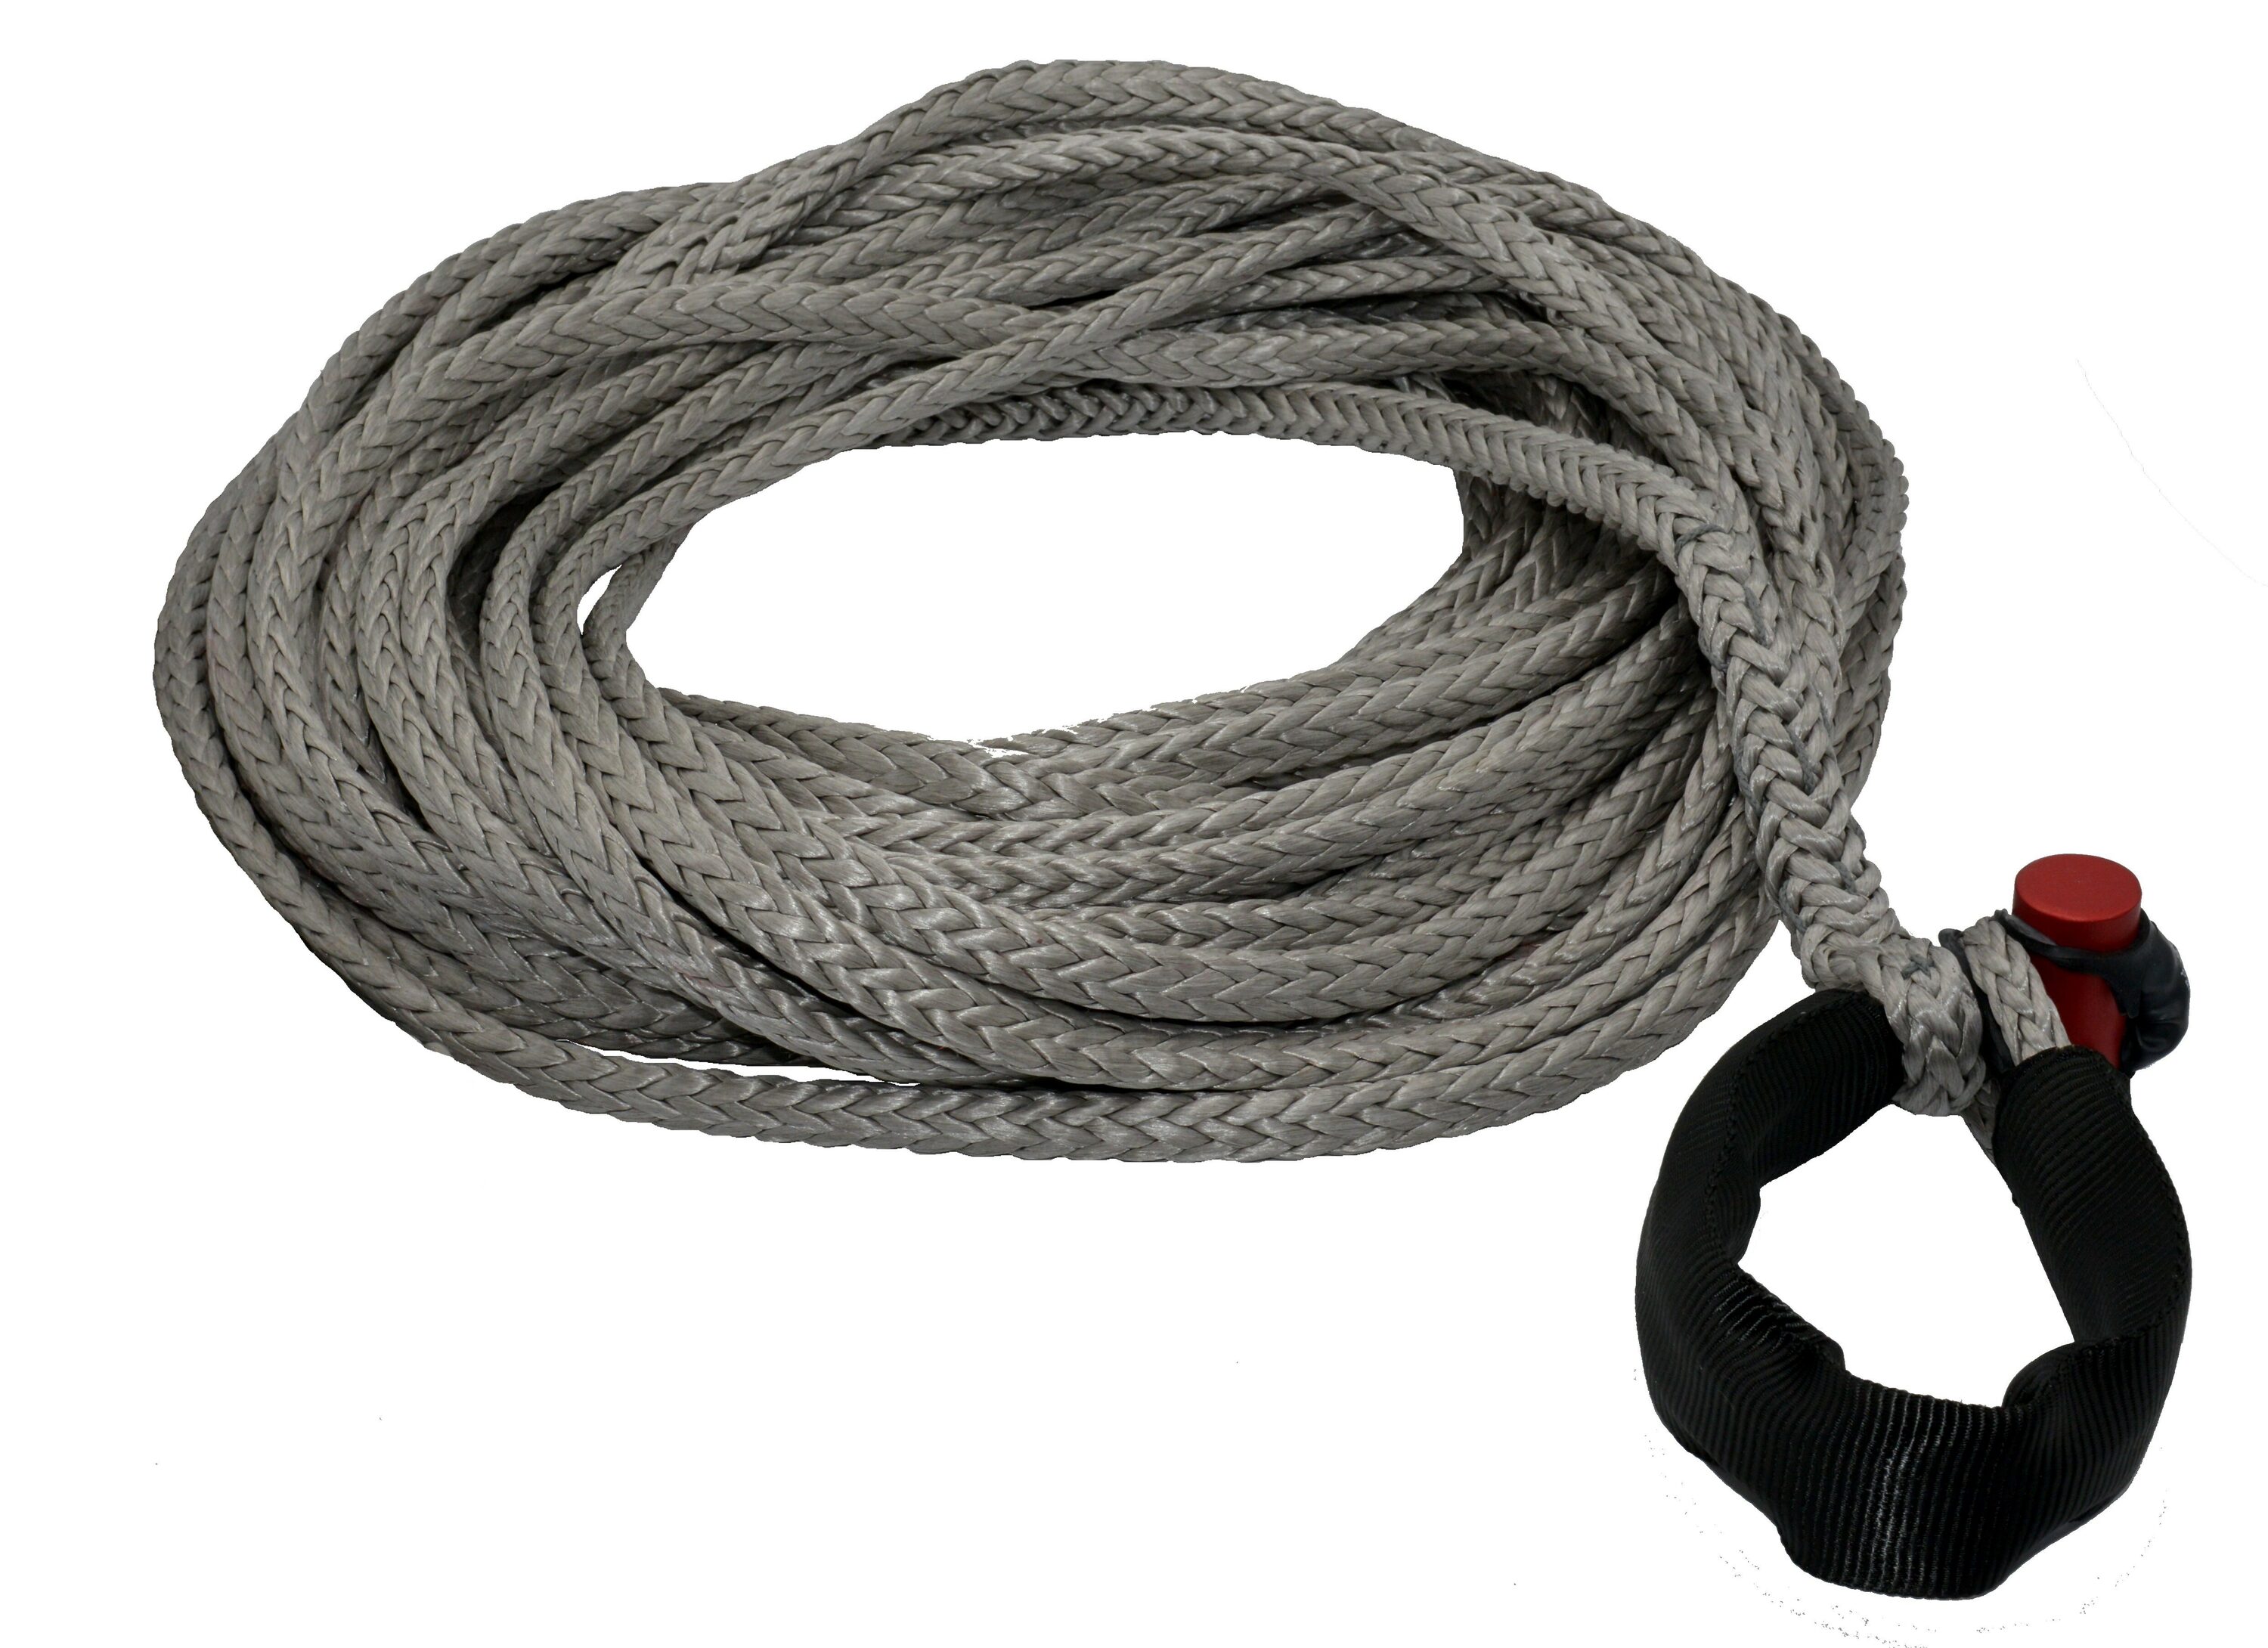 LockJaw Synthetic Winch Rope 3/8-in 6,600 lb. with Lockable